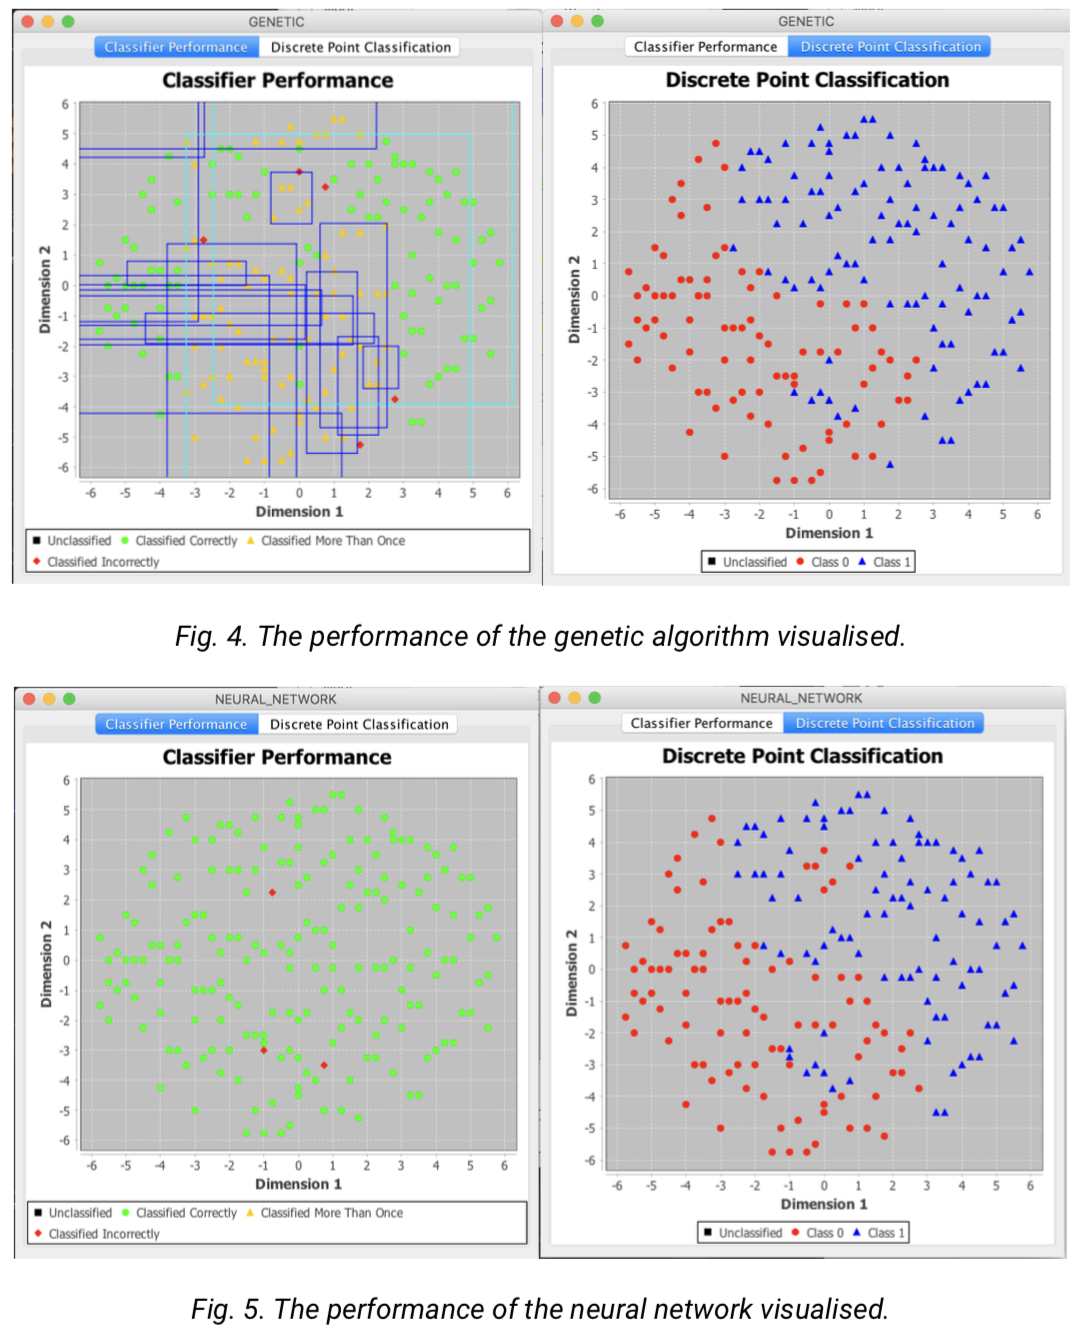 Performance of two algorithms compared